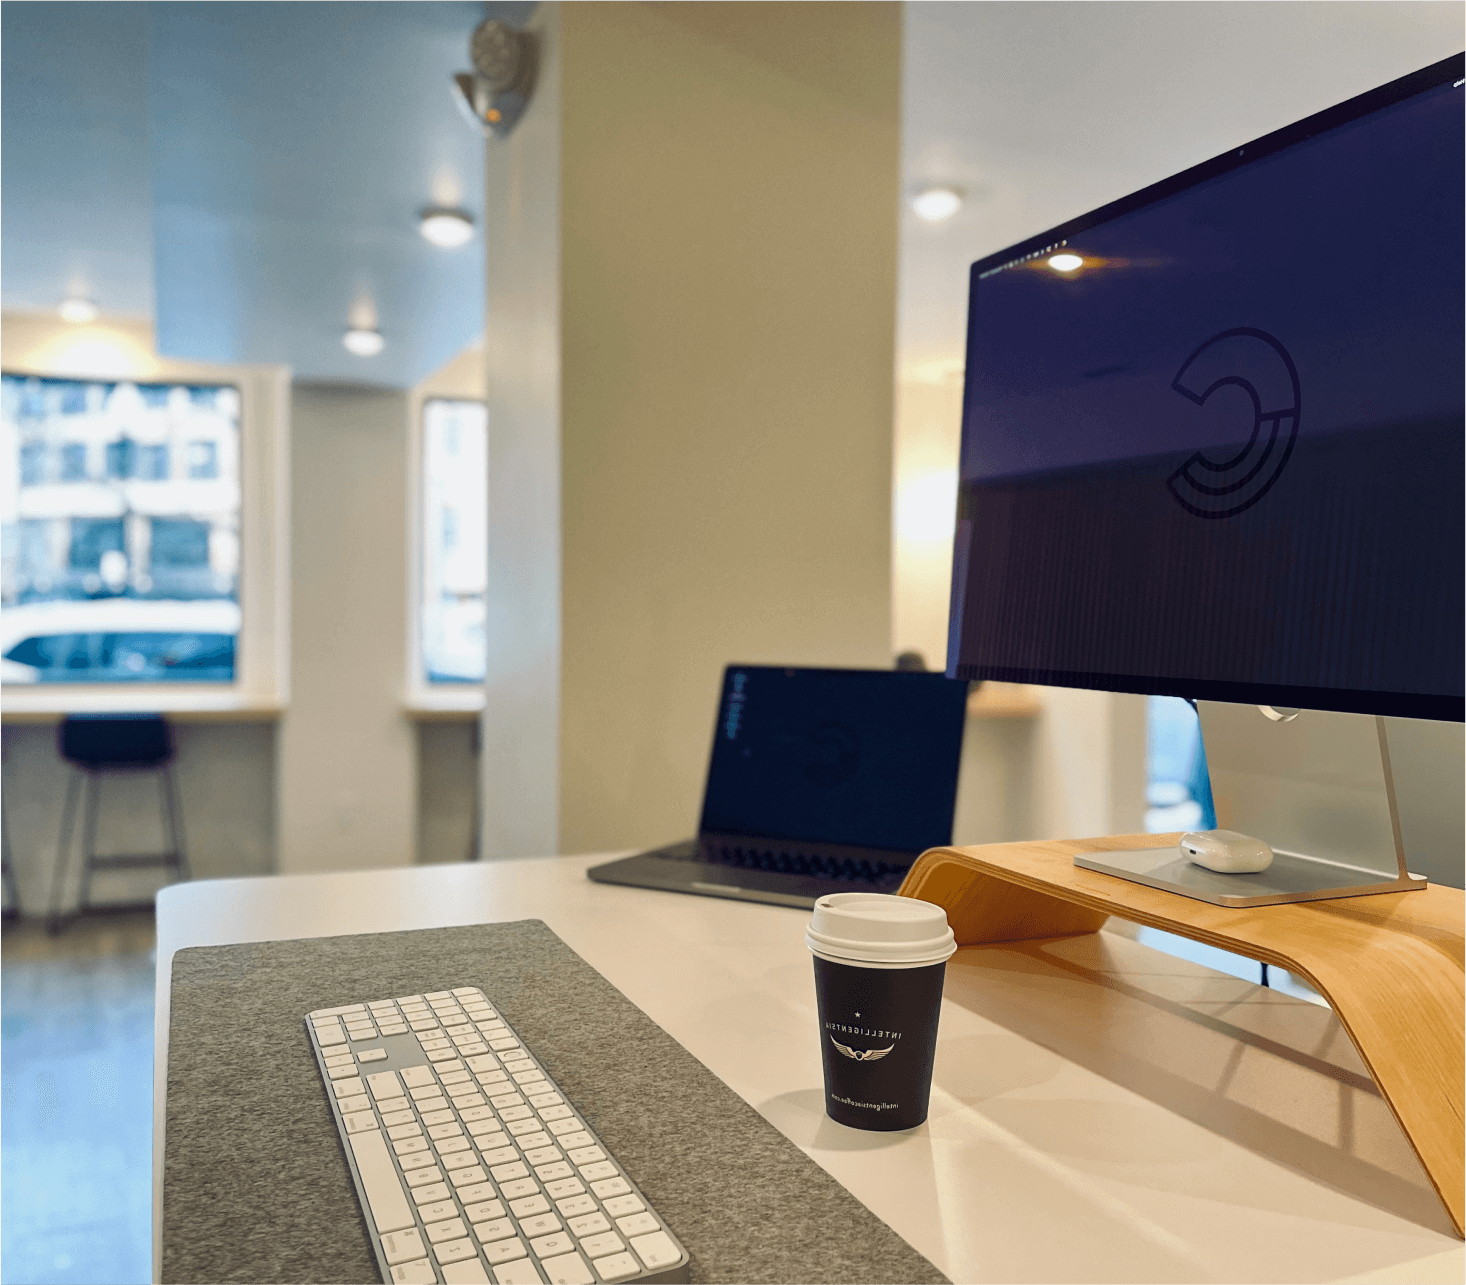 Close-up shot of a desk setup in the Craft Boston office featuring a desktop monitor, keyboard, laptop, and cup of coffee.